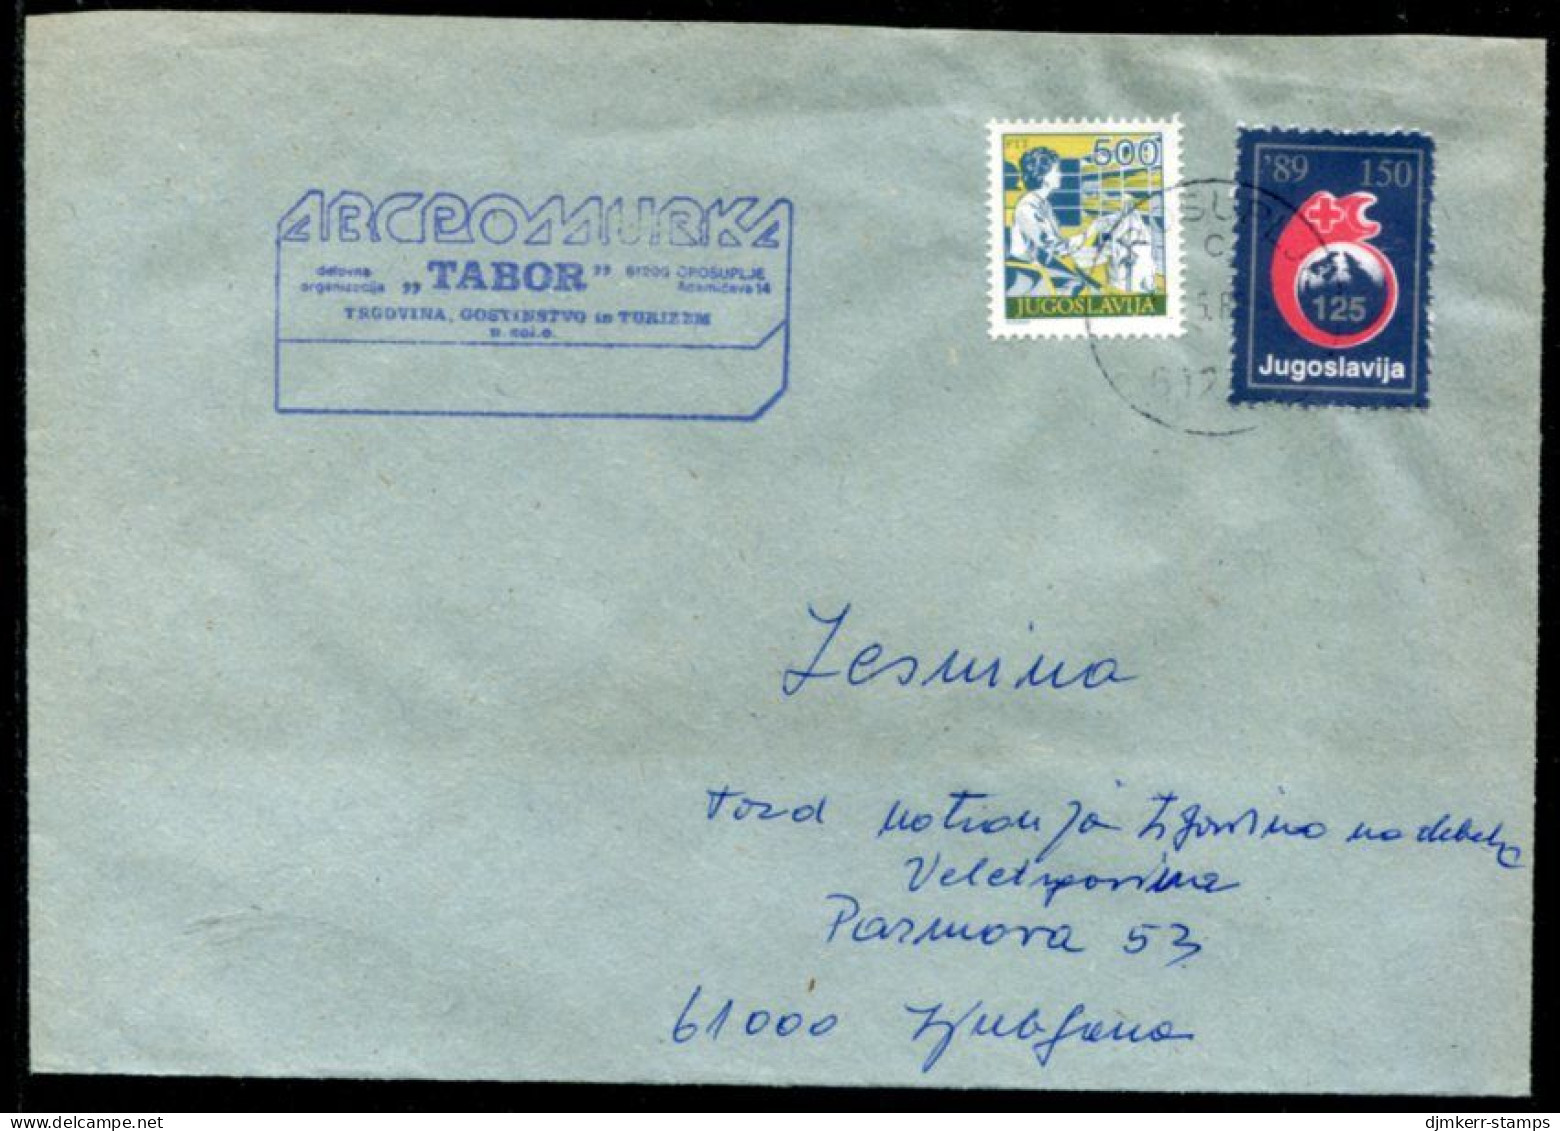 YUGOSLAVIA 1989 Commercial Cover With Red Cross Week 150 D Tax.  Michel ZZM 169 - Beneficenza